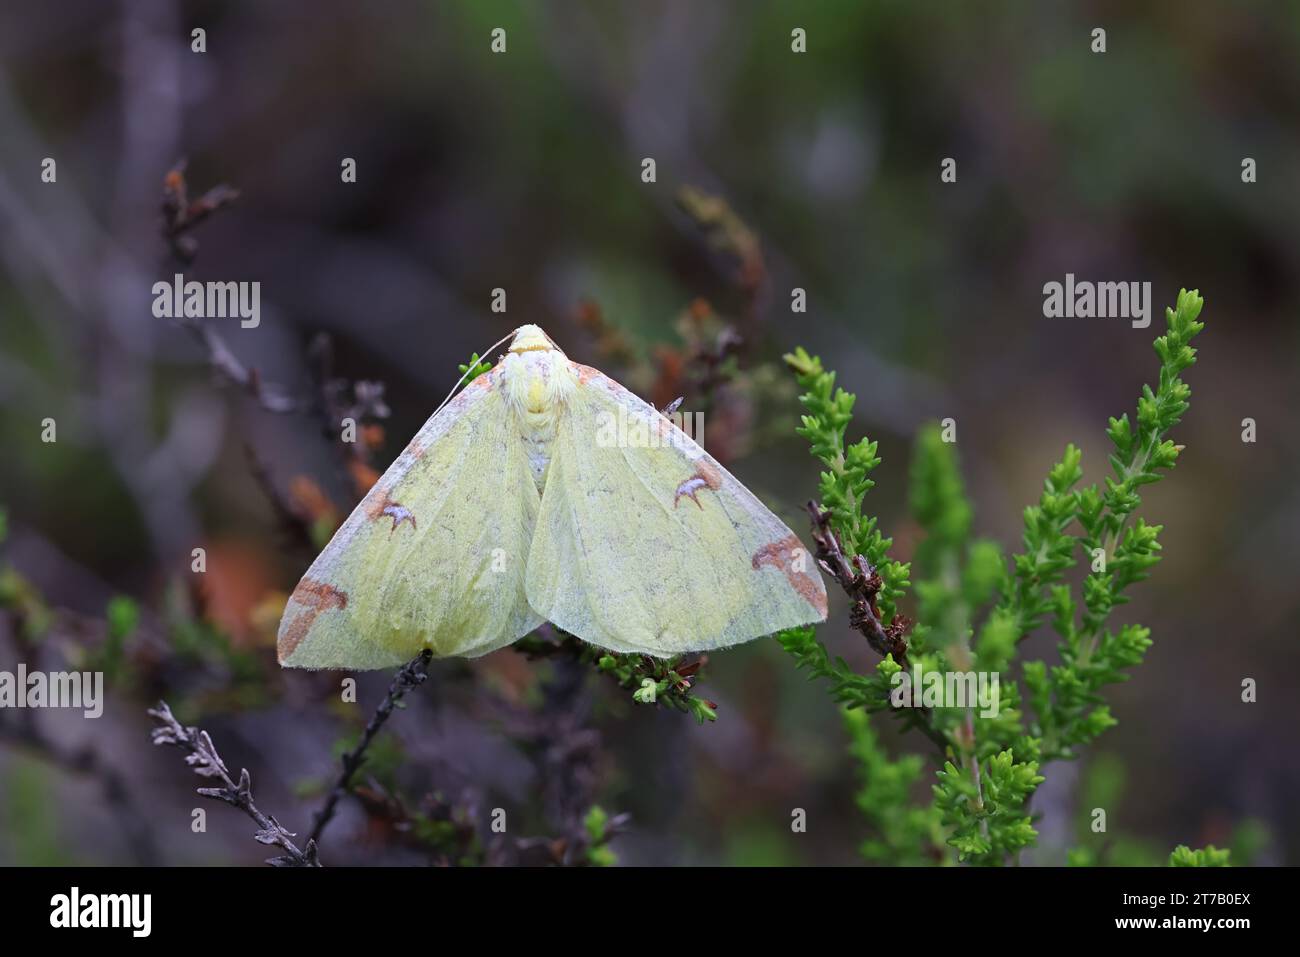 Opisthograptis luteolata, commonly known as brimstone moth, geometer moth from Finland Stock Photo